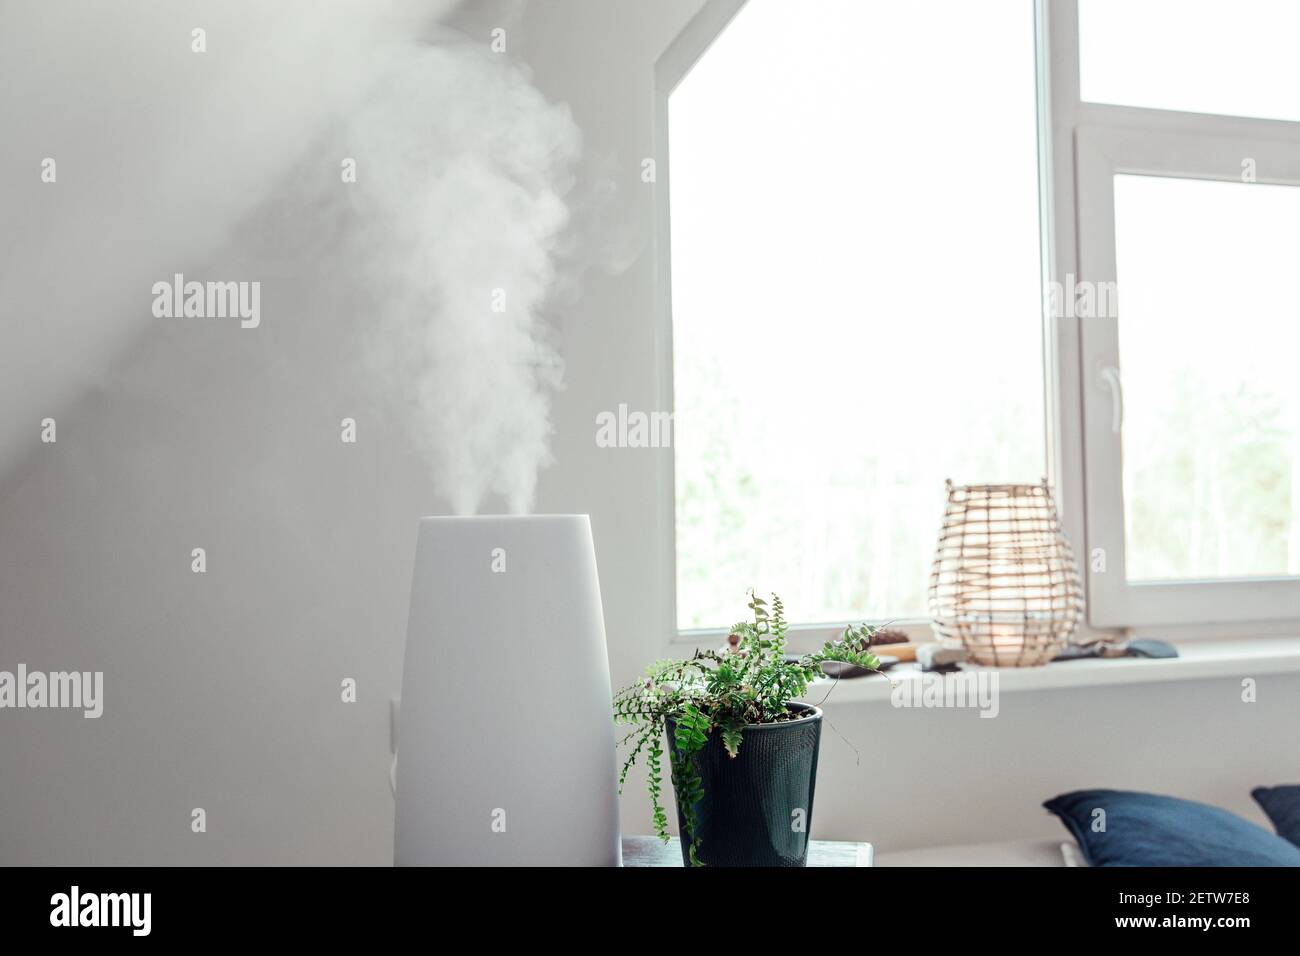 Humidifier adds water to the air by boiling water into steam. Reduces dry air, healthy home environment which can help relieve a stuffy nose. Stock Photo